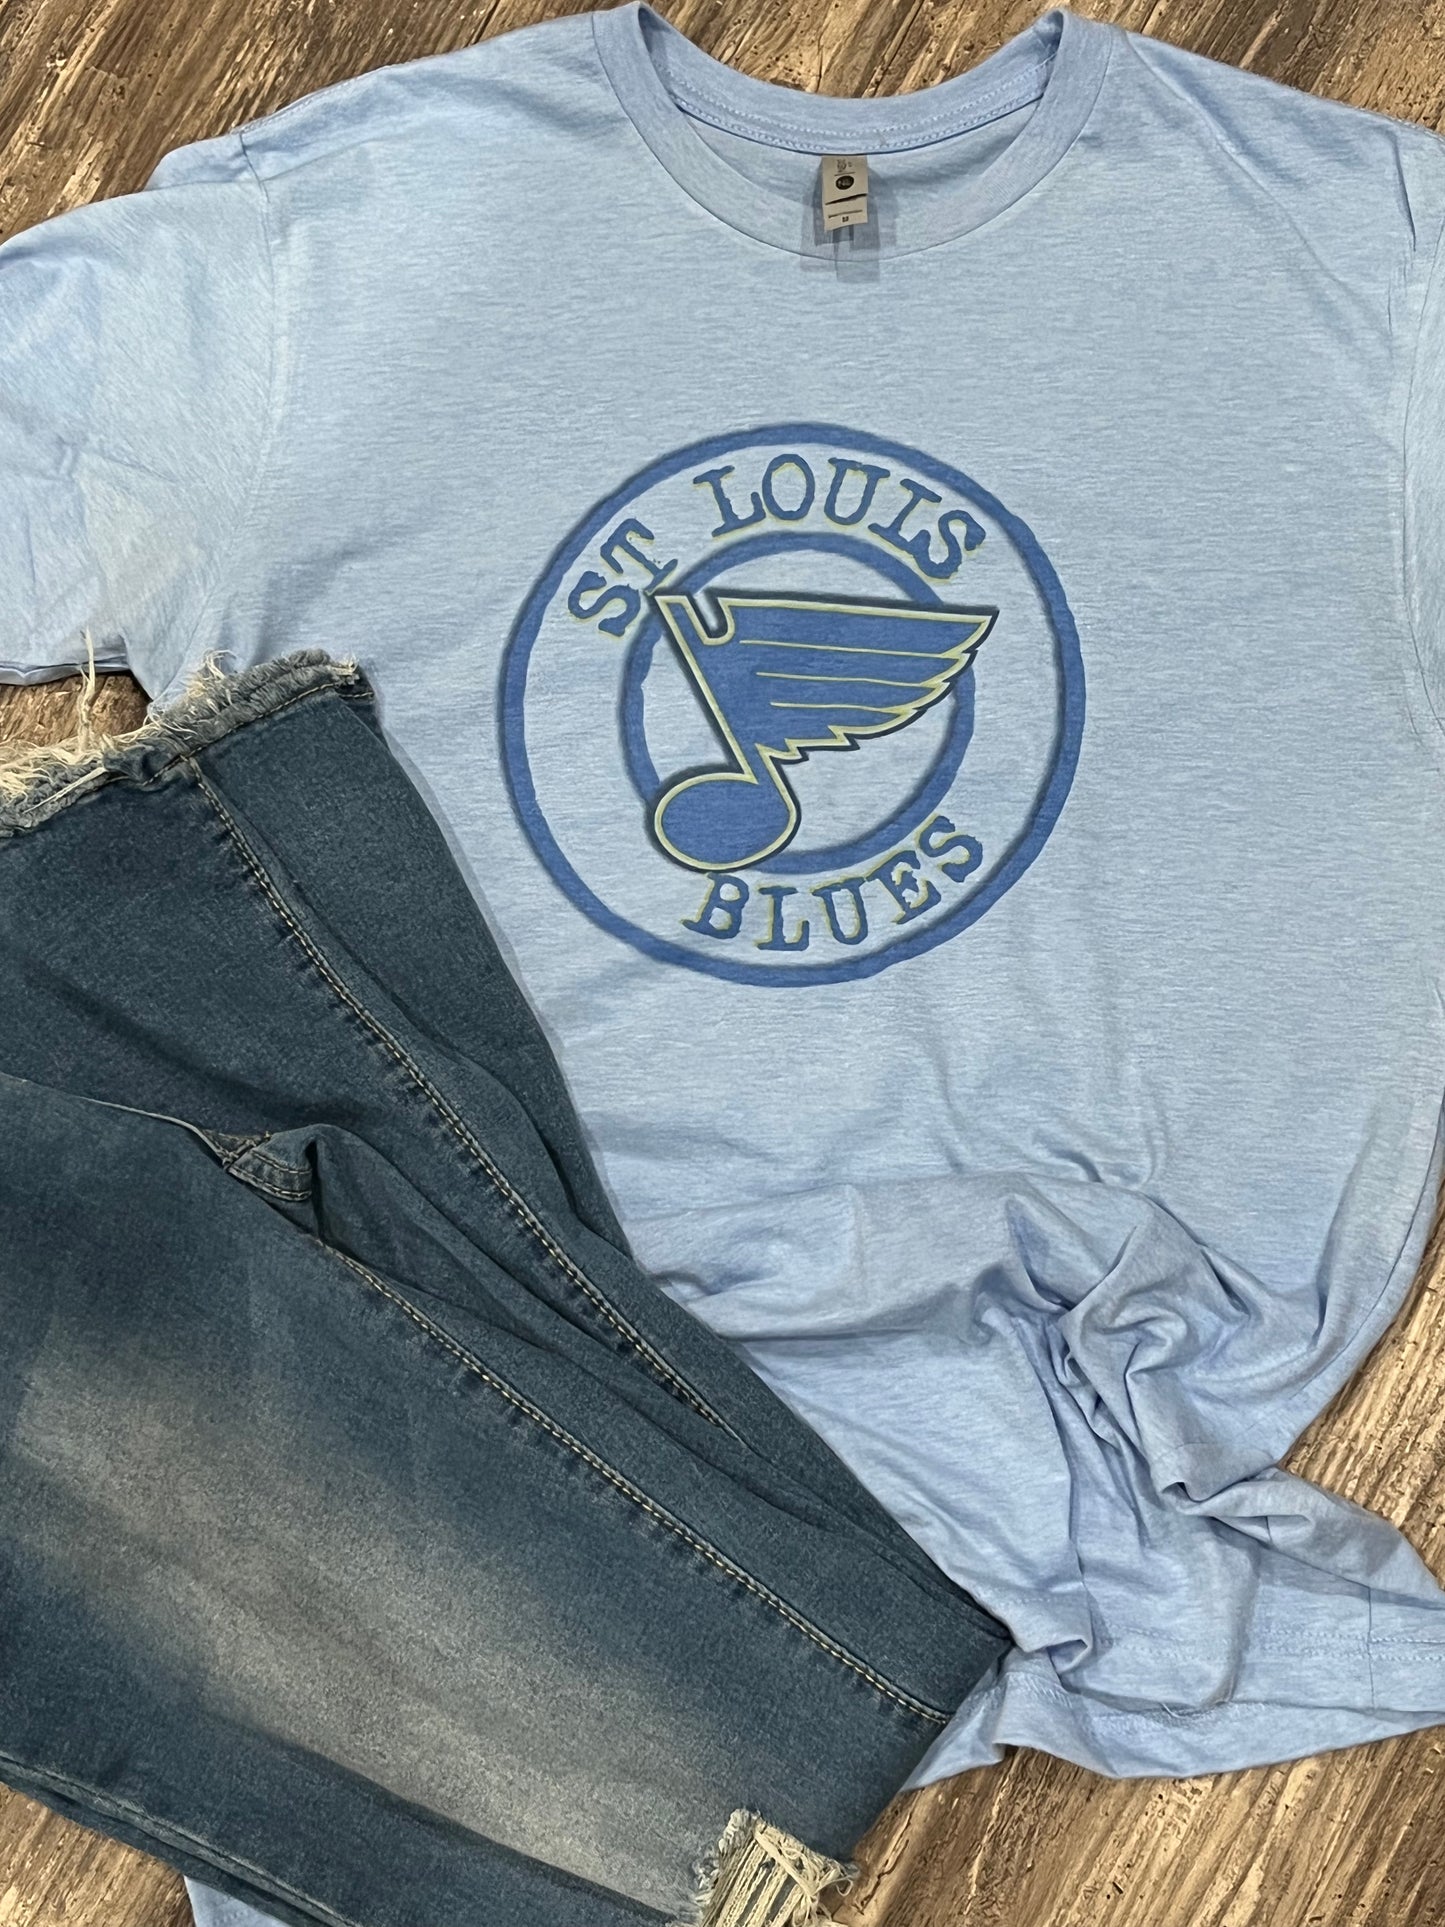 St. Louis Blues with Blues Note